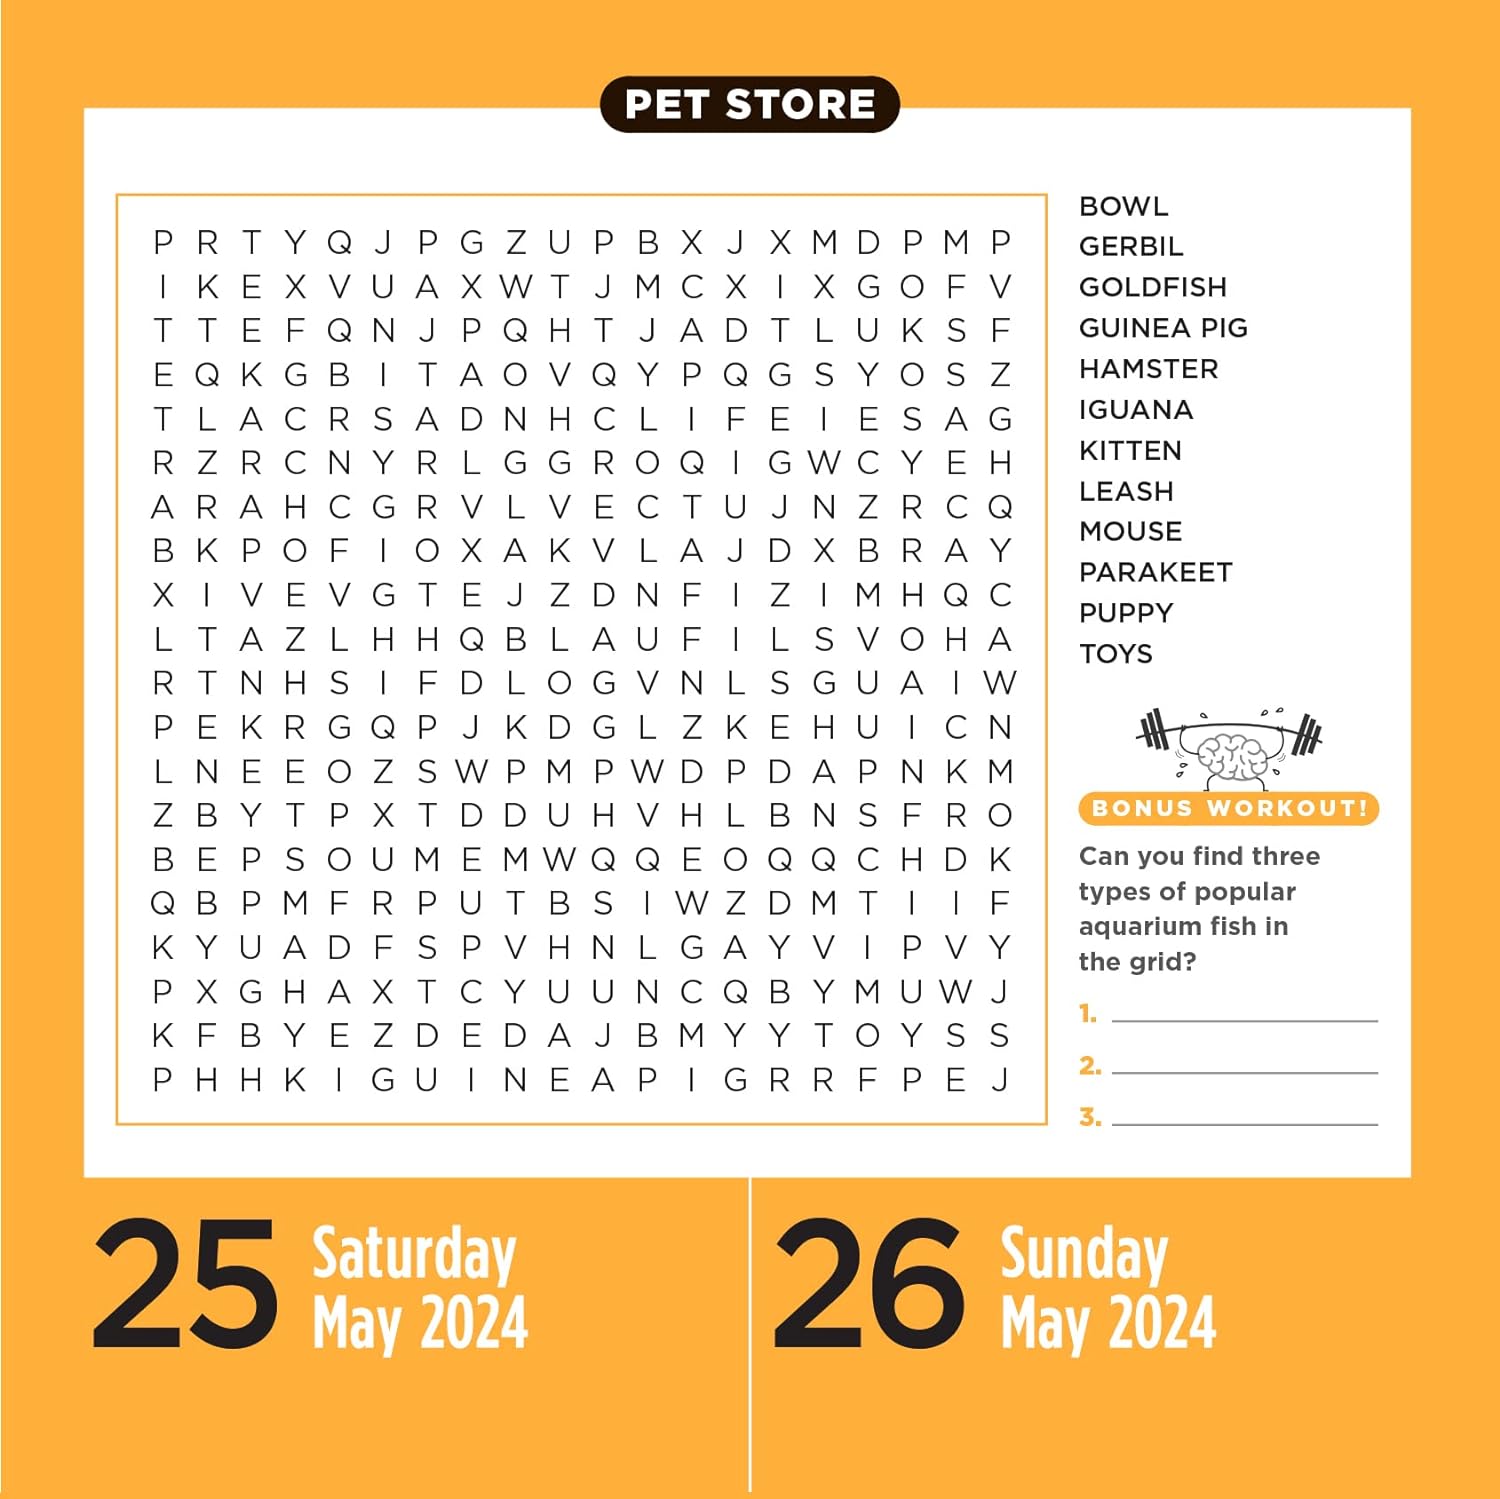 brain-workout-word-search-page-a-day-calendar-2024